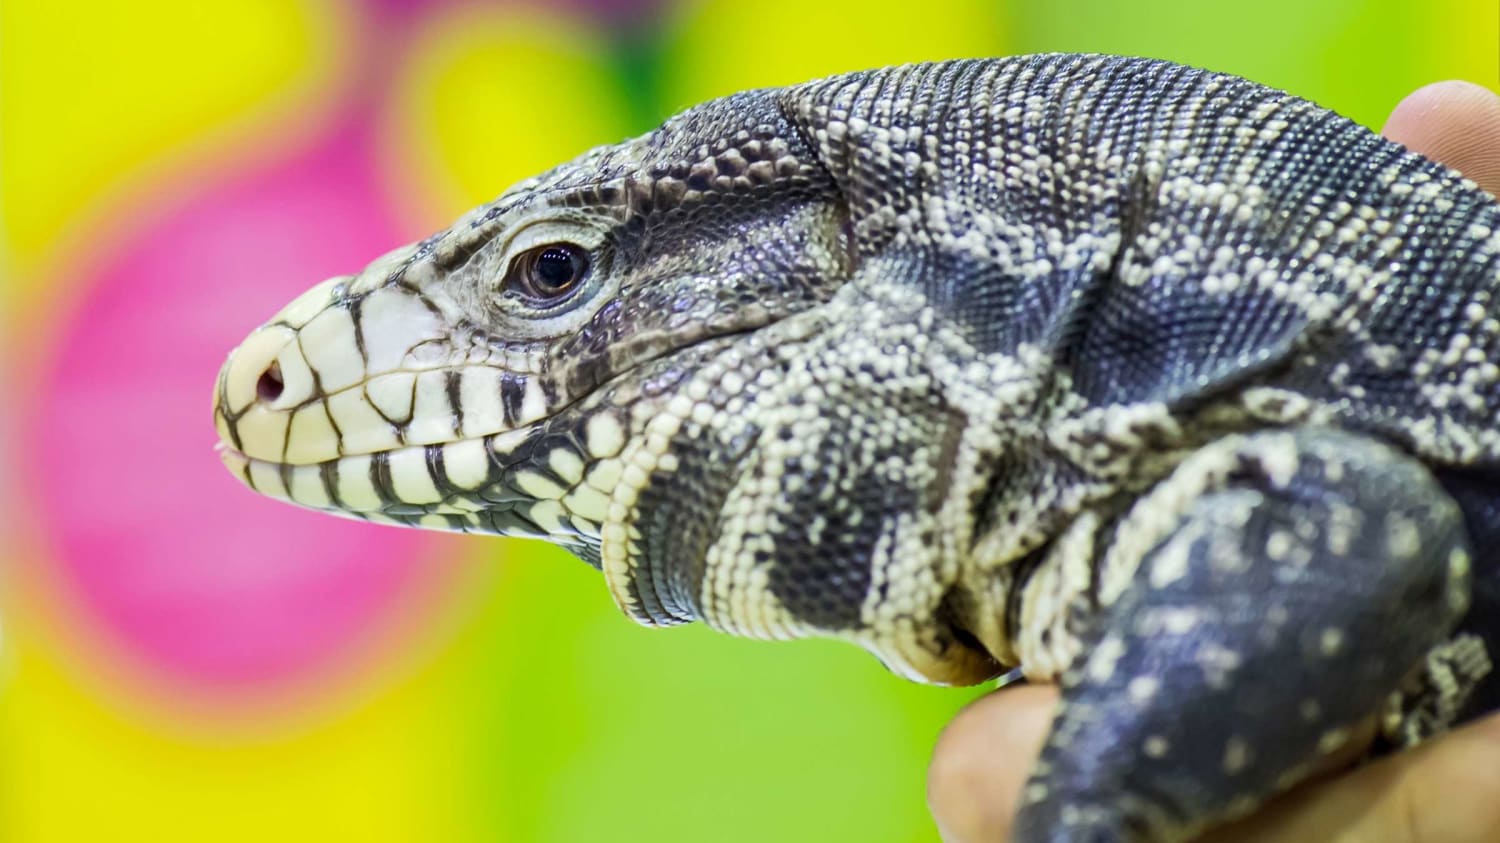 Have You Seen This Tegu? These 4-Foot-Long Lizards Are Invading Georgia and Eating Everything in Their Path